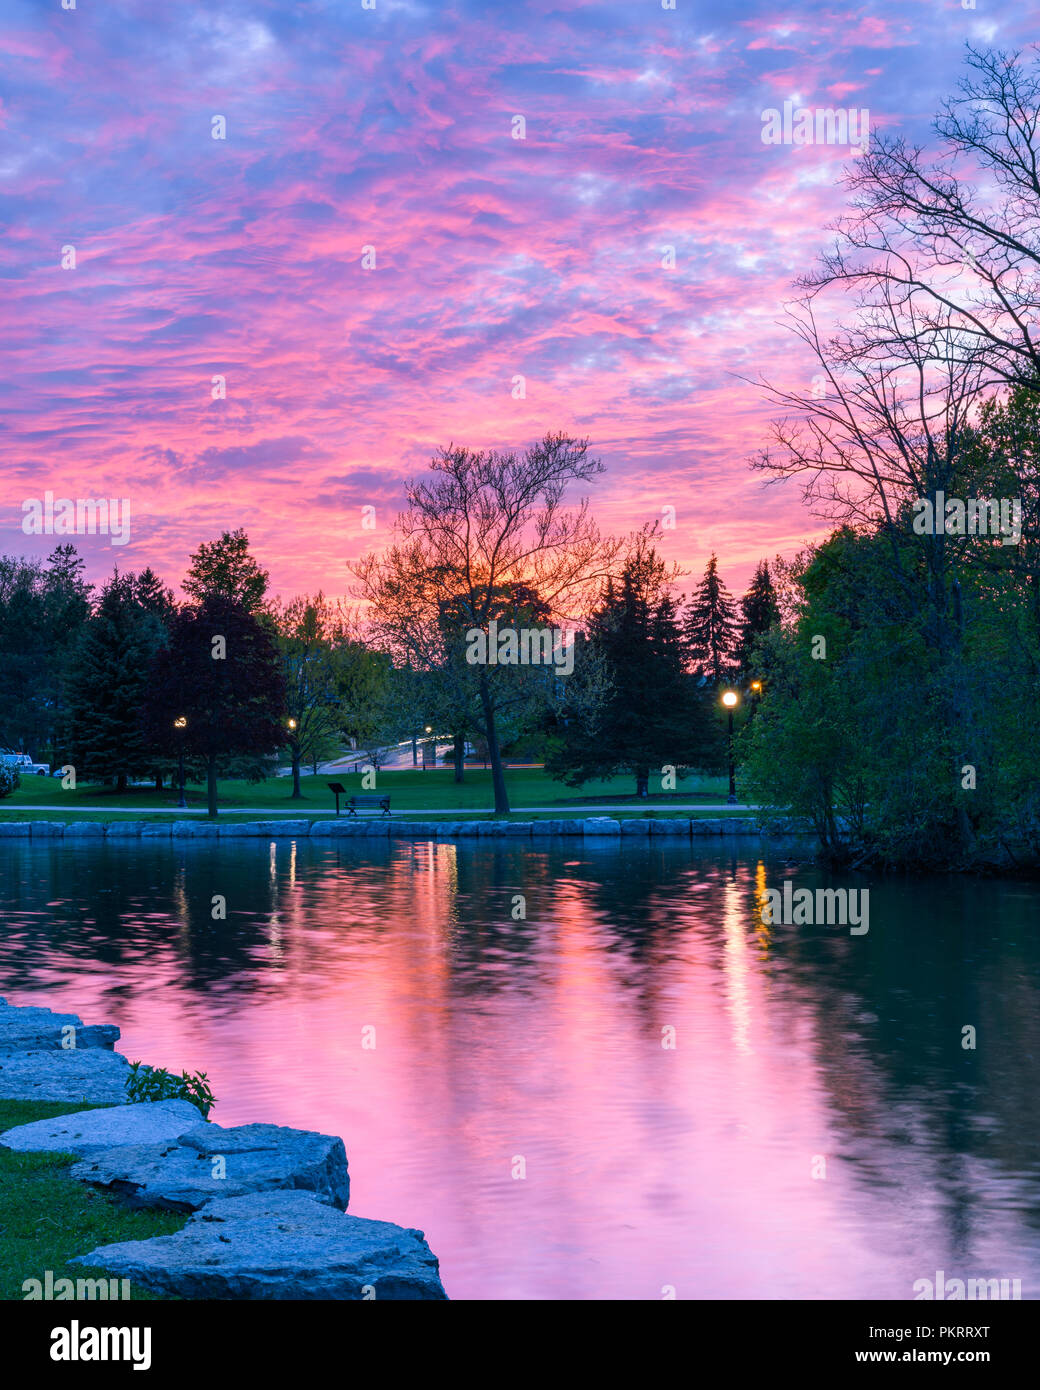 Sunset At A Park Near A River With Trees In The Background And A Sky That Looks Like Cotton Candy Stock Photo